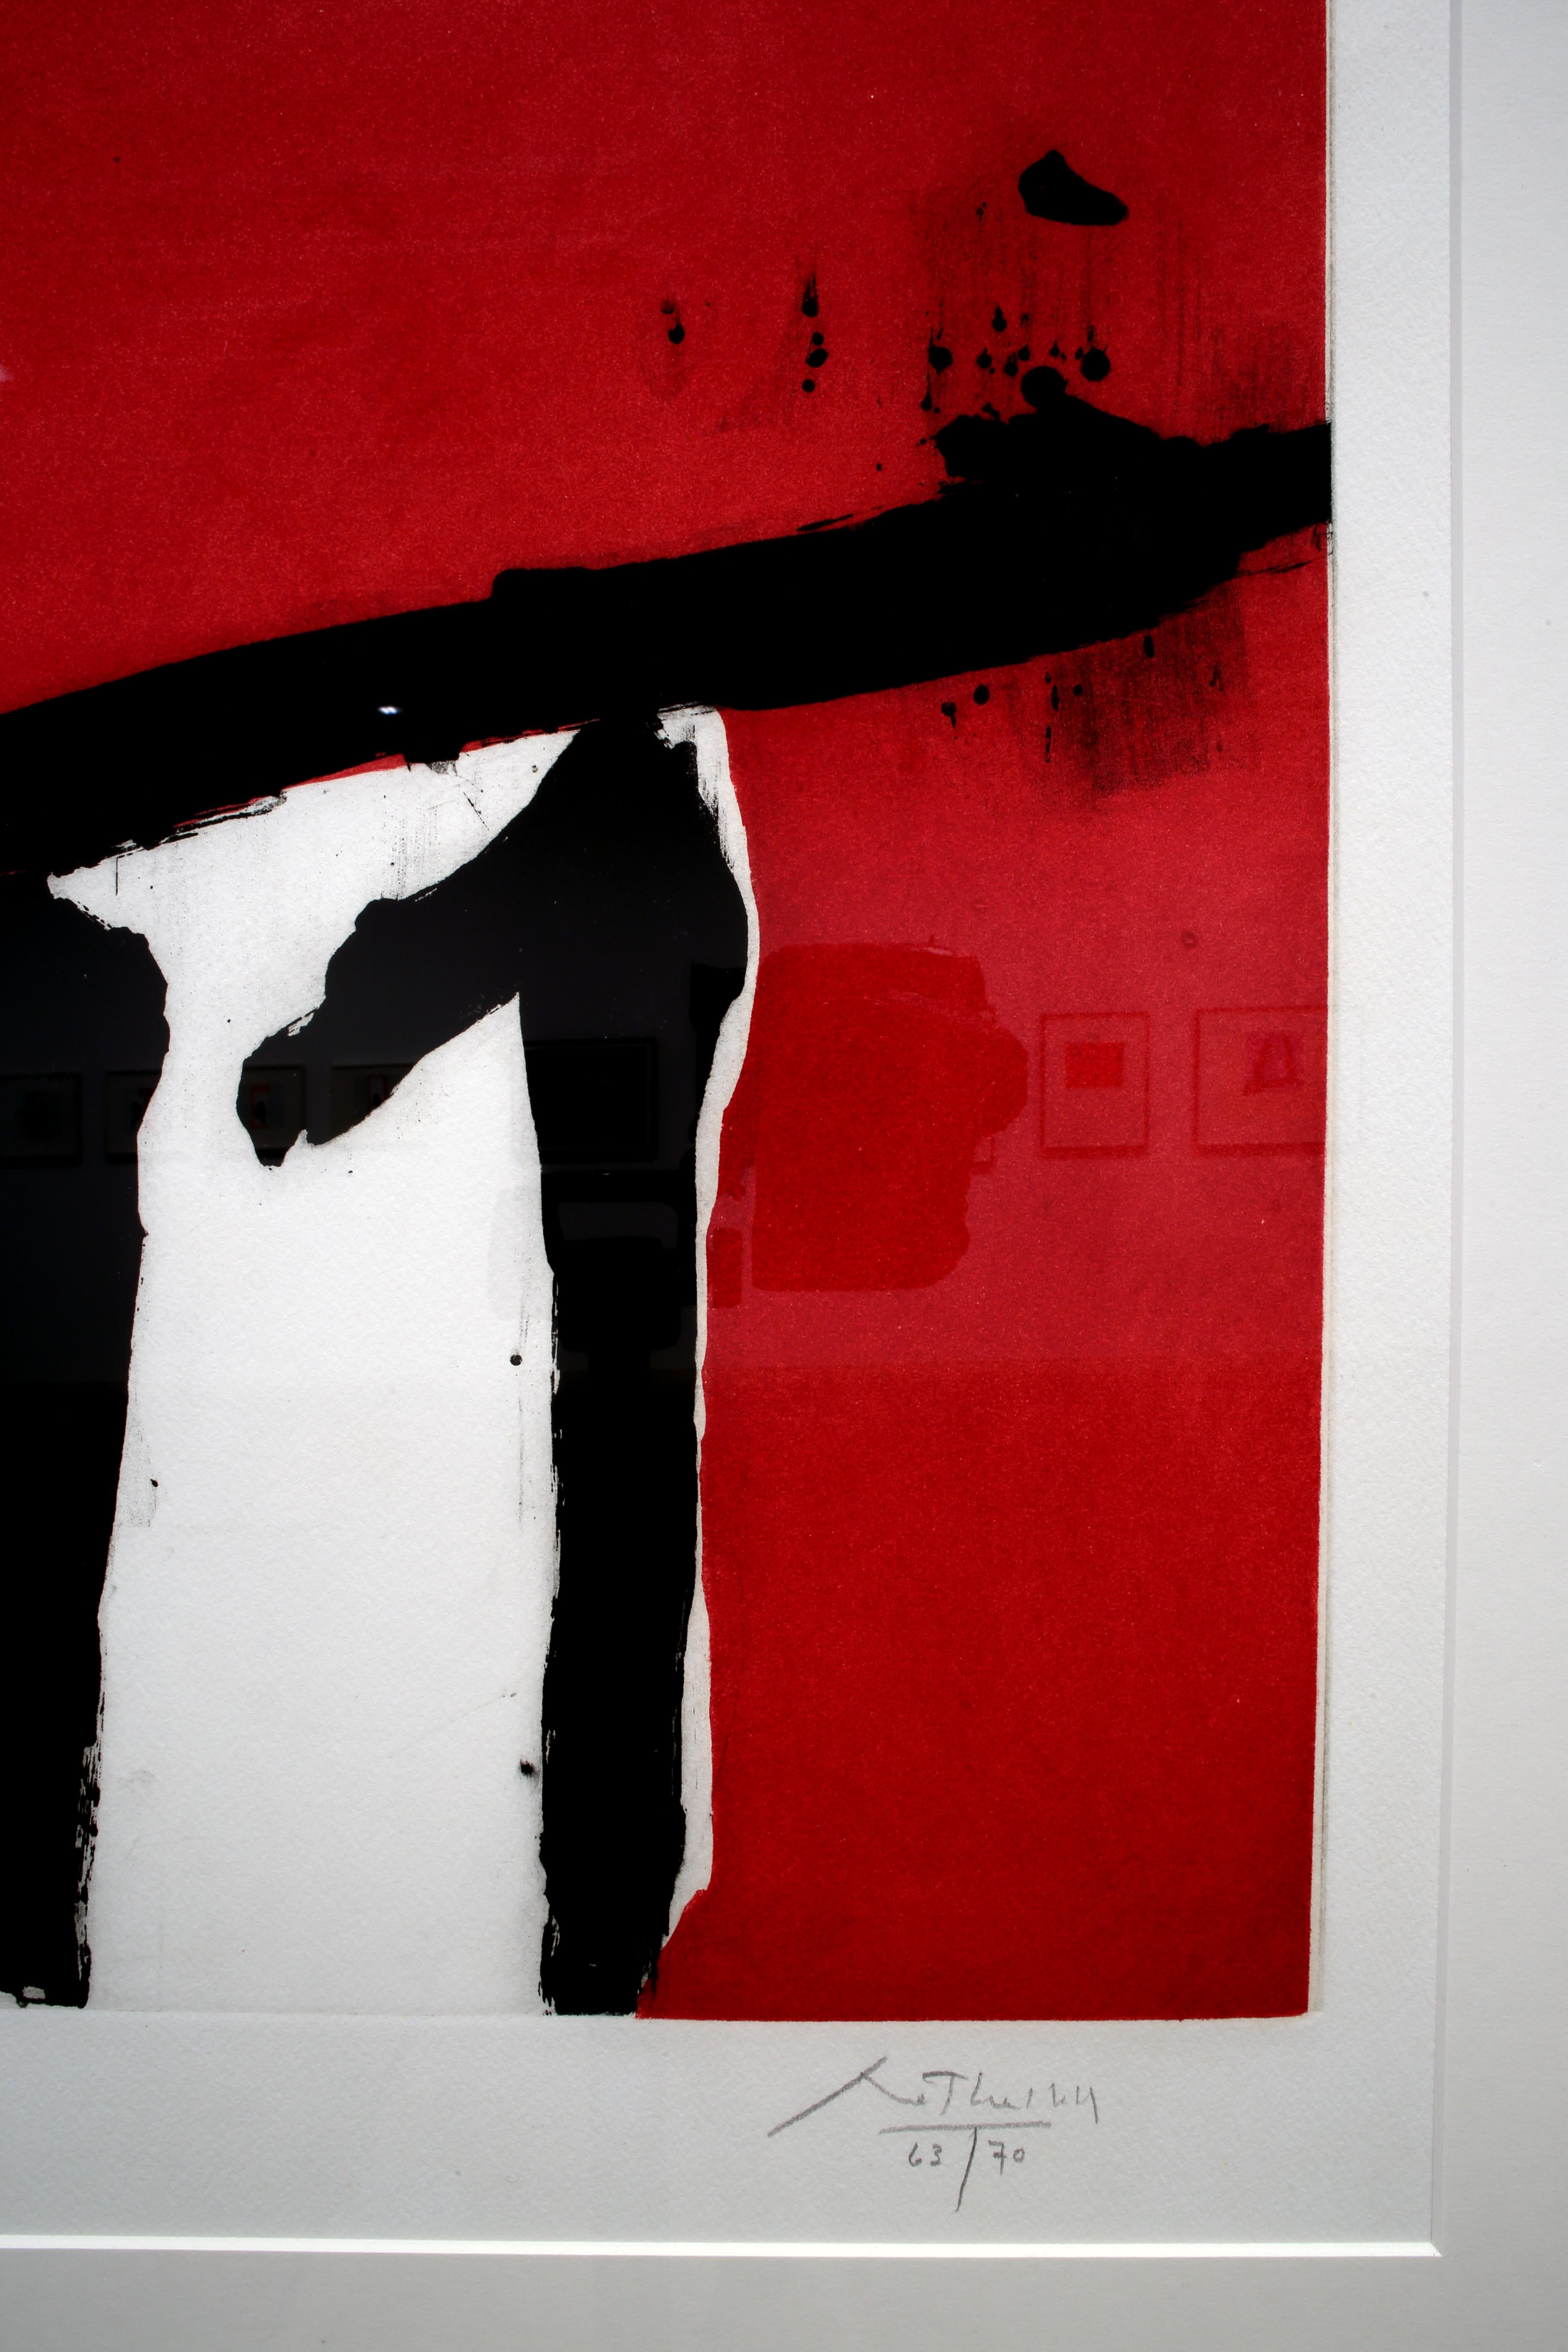 Mexican Night II - Abstract Expressionist Print by Robert Motherwell